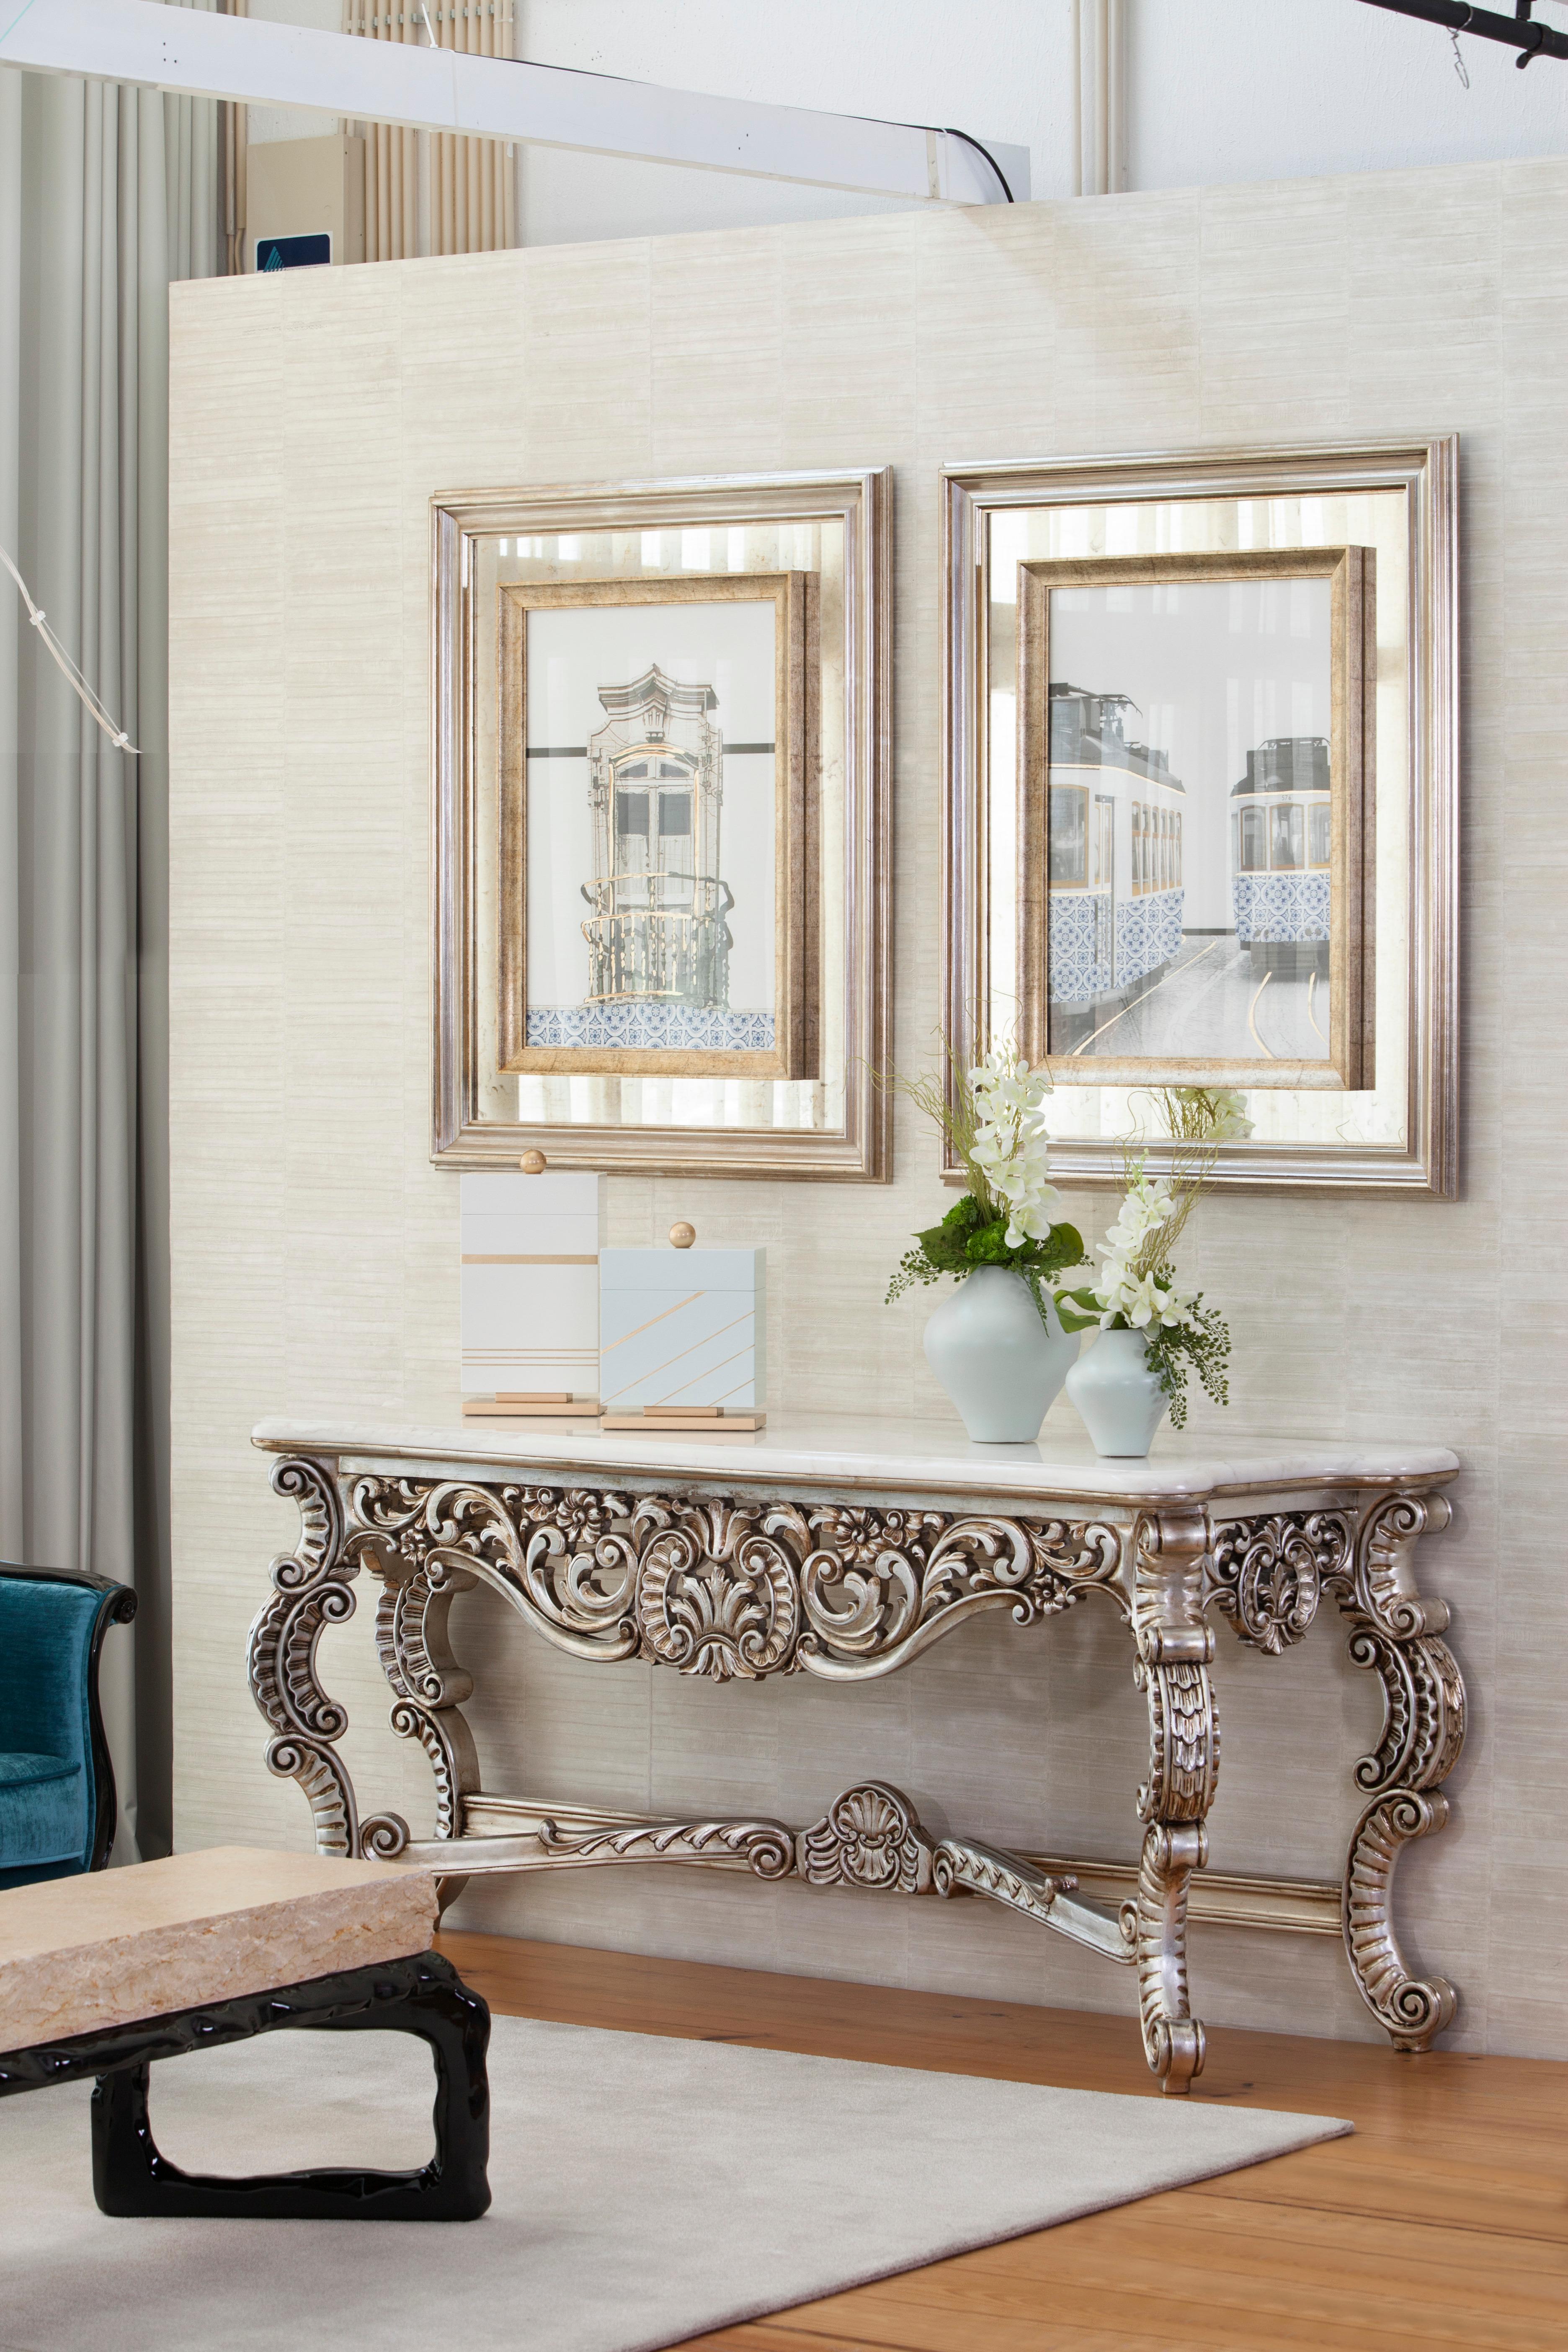 Parma console, Neoclassical collection, handcrafted in Portugal - Europe by GF Modern.

A French Neoclassical style console table, Parma is handcarved in linden wood.

An exclusive and sumptuous console table that catches the eye of anyone who